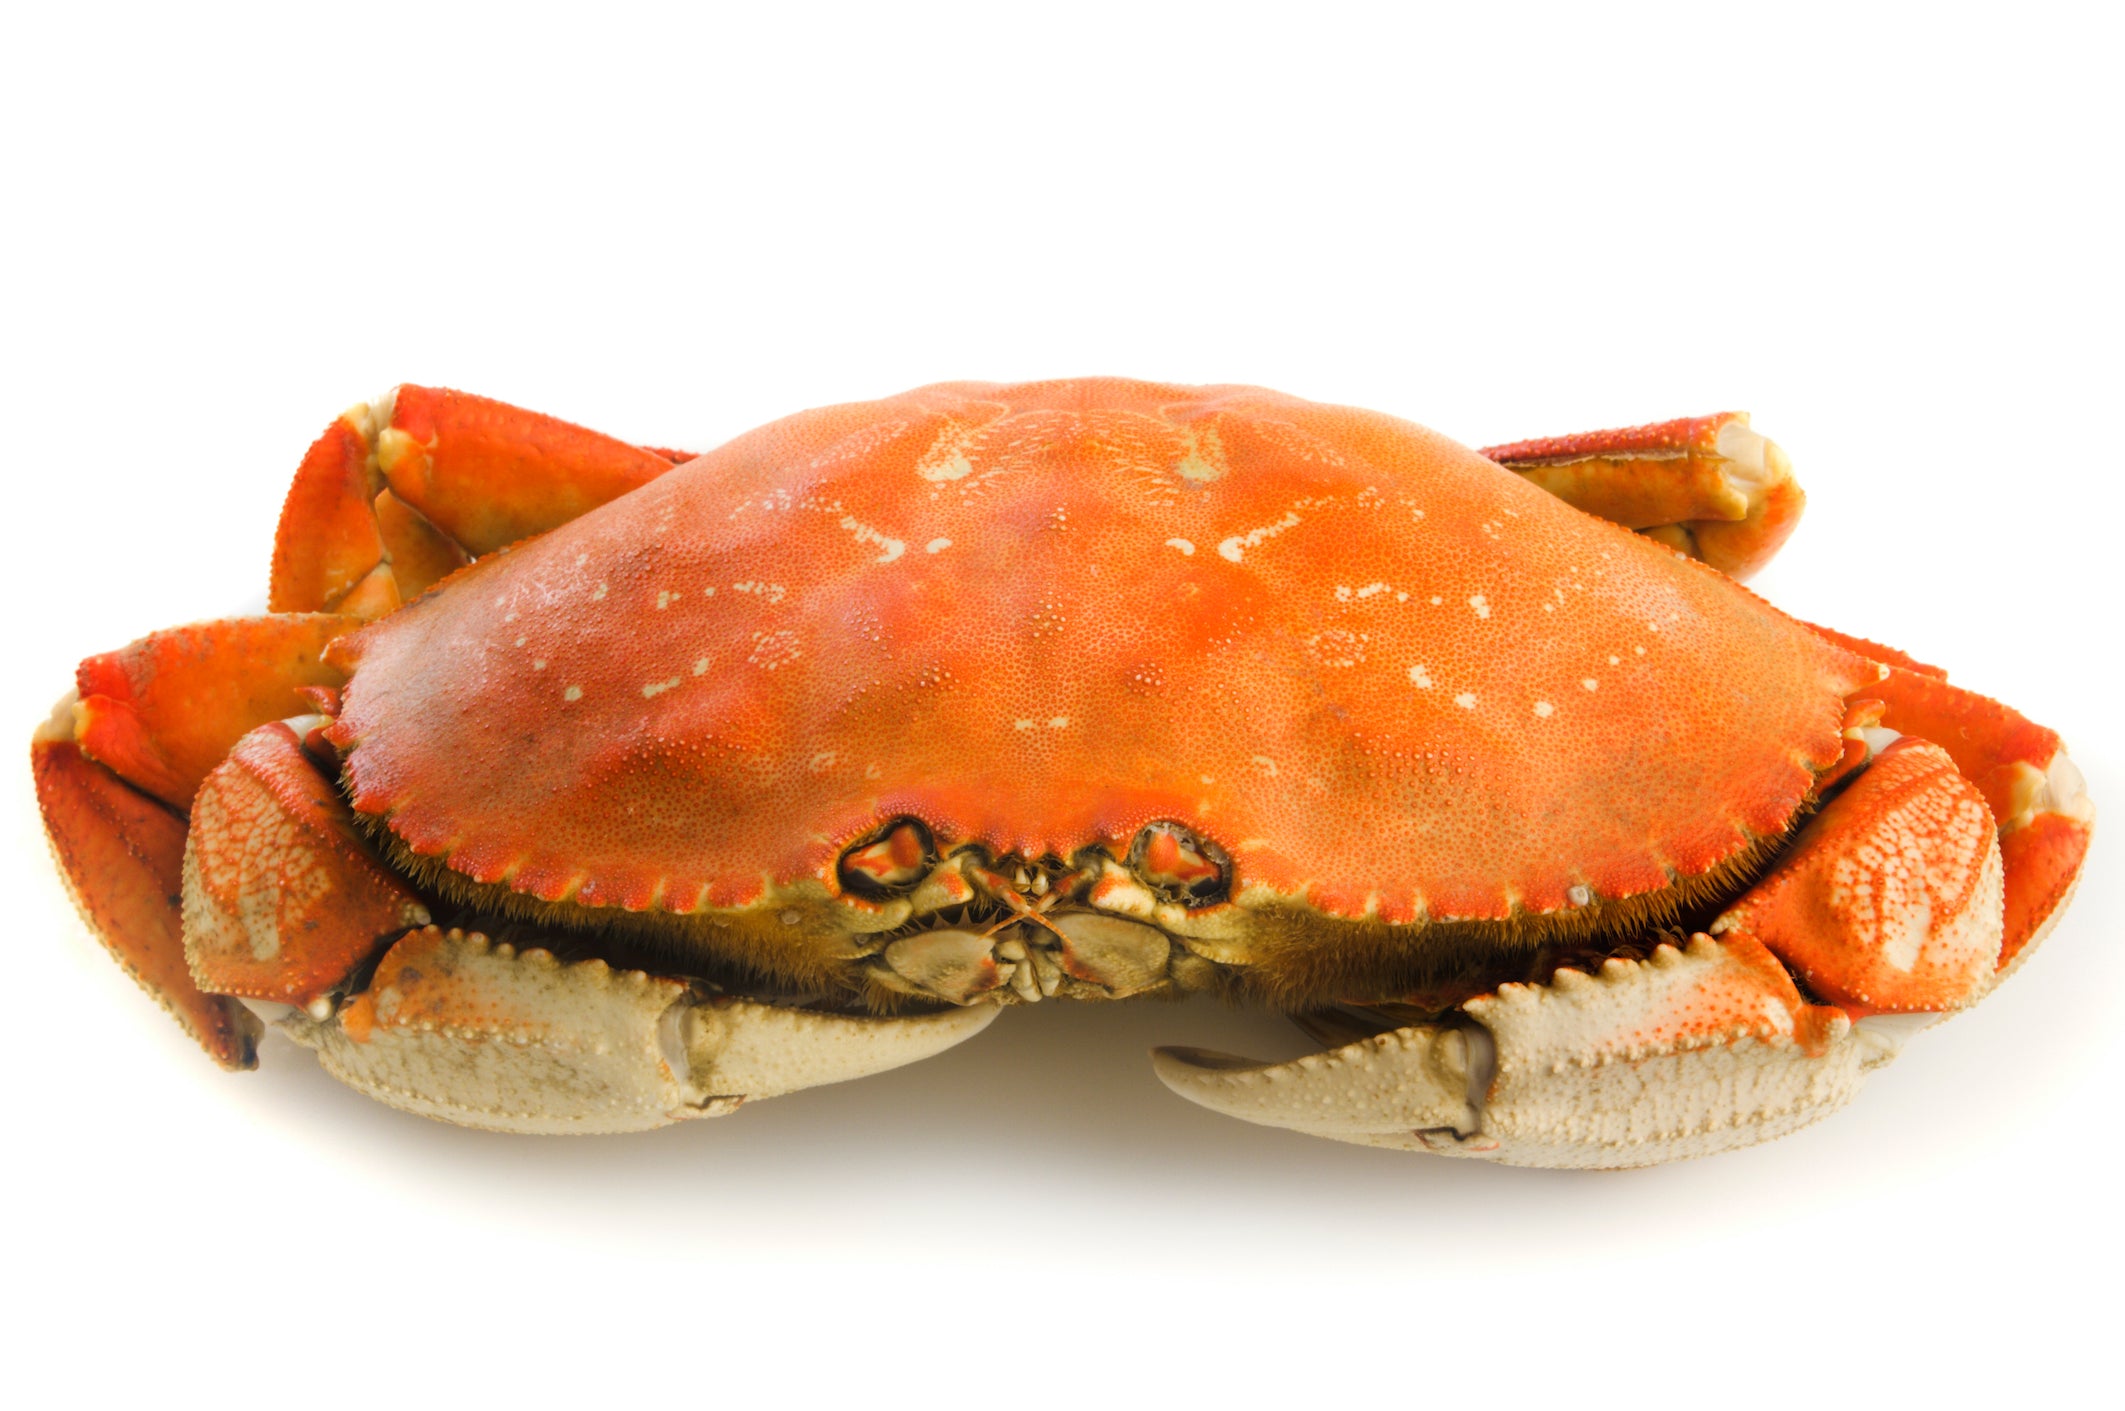 Whole Cooked Dungeness Crab - Pacific Dream Seafoods